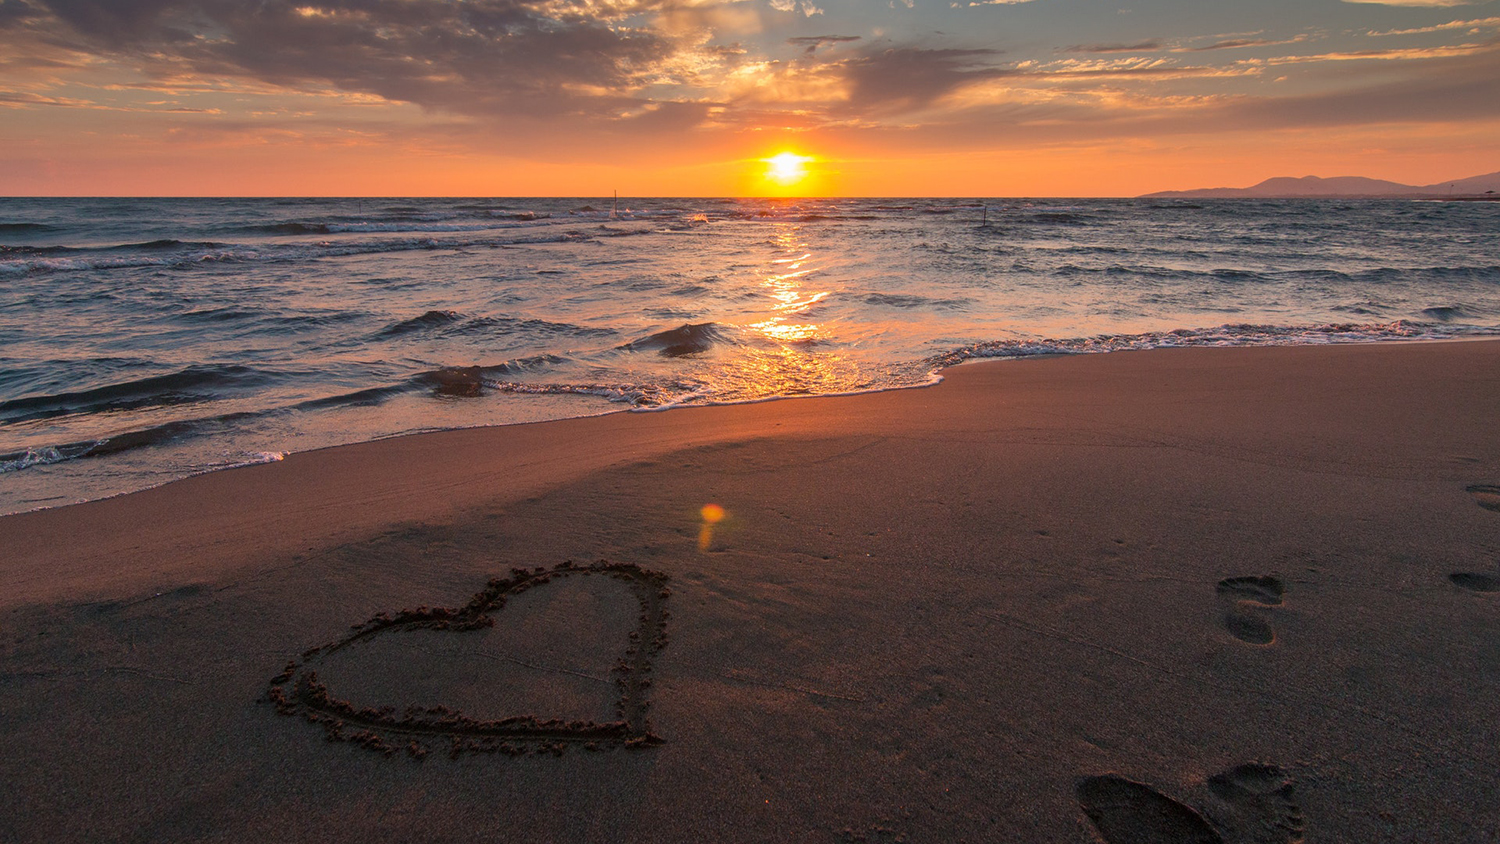 Beach sunset with heart drawn in the sand